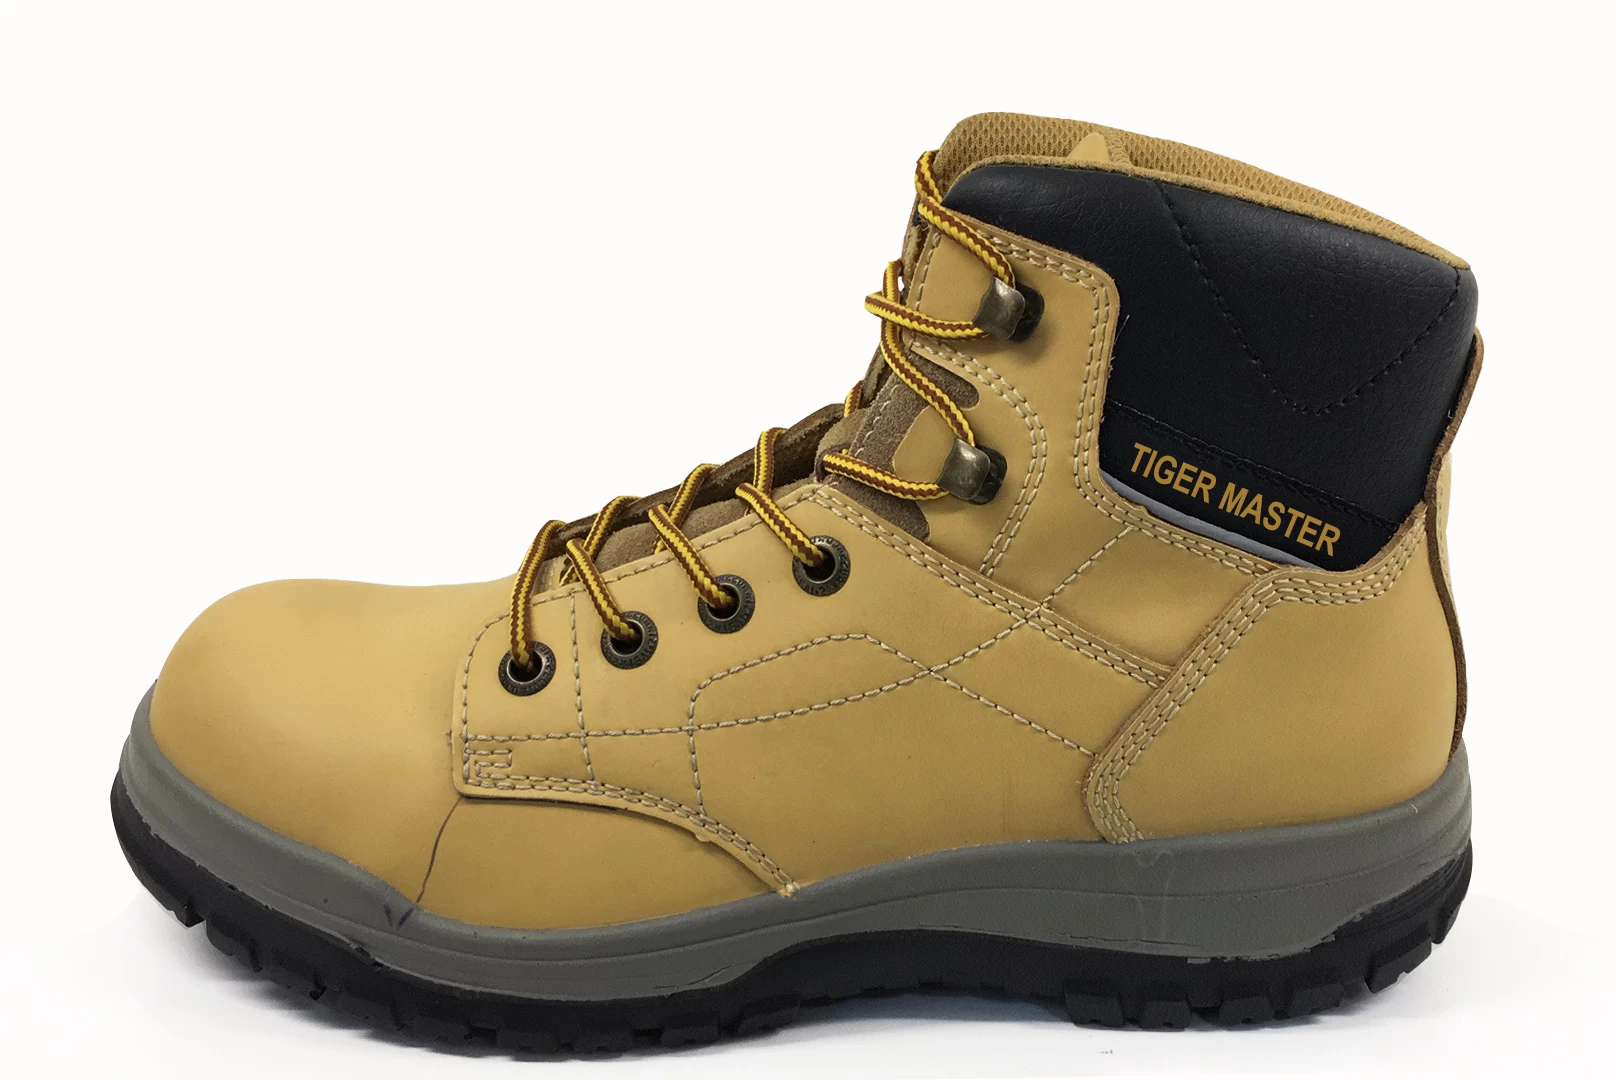 0160 split nubuck leather high ankle safety boots shoes